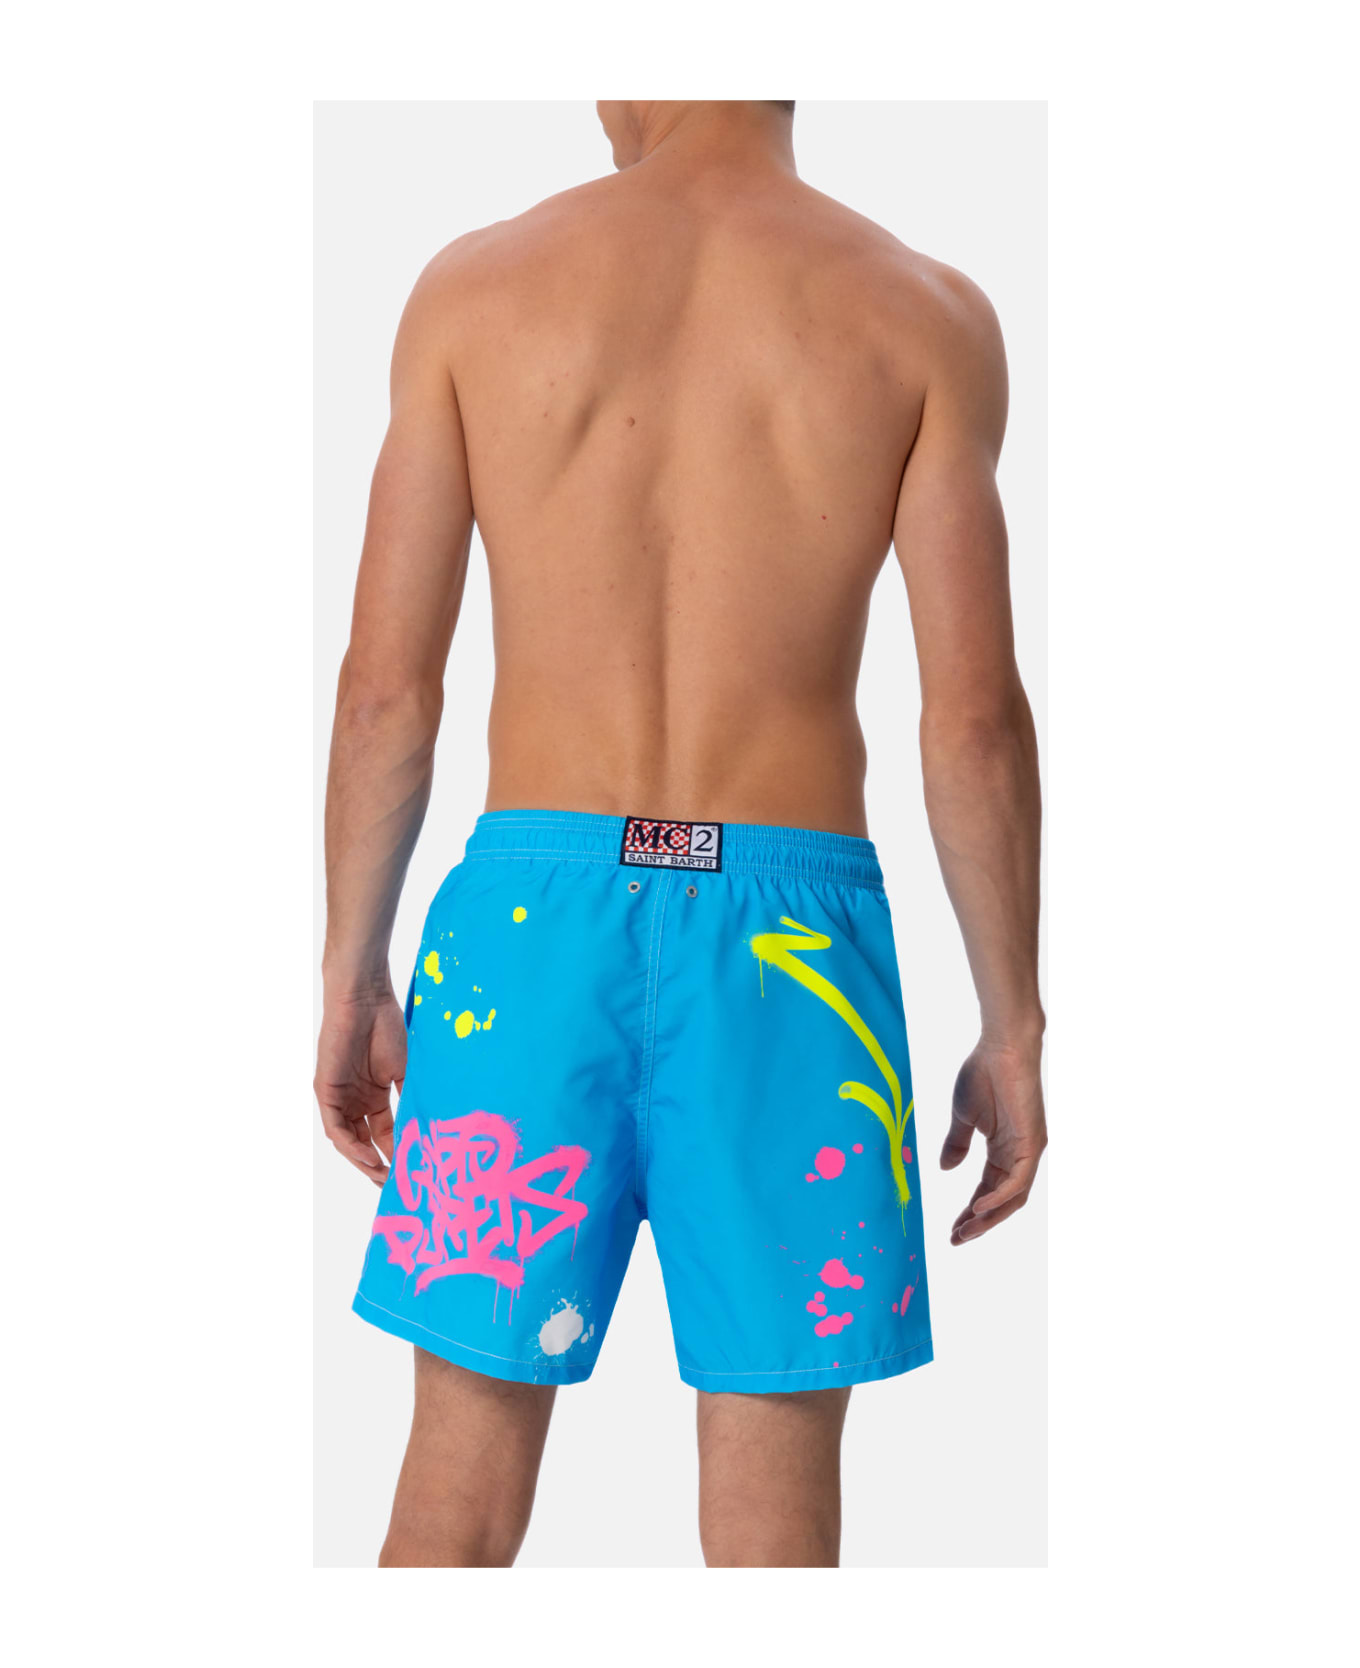 MC2 Saint Barth Man Swim Shorts With Duck Print | Crypto Puppets® Special Edition - SKY